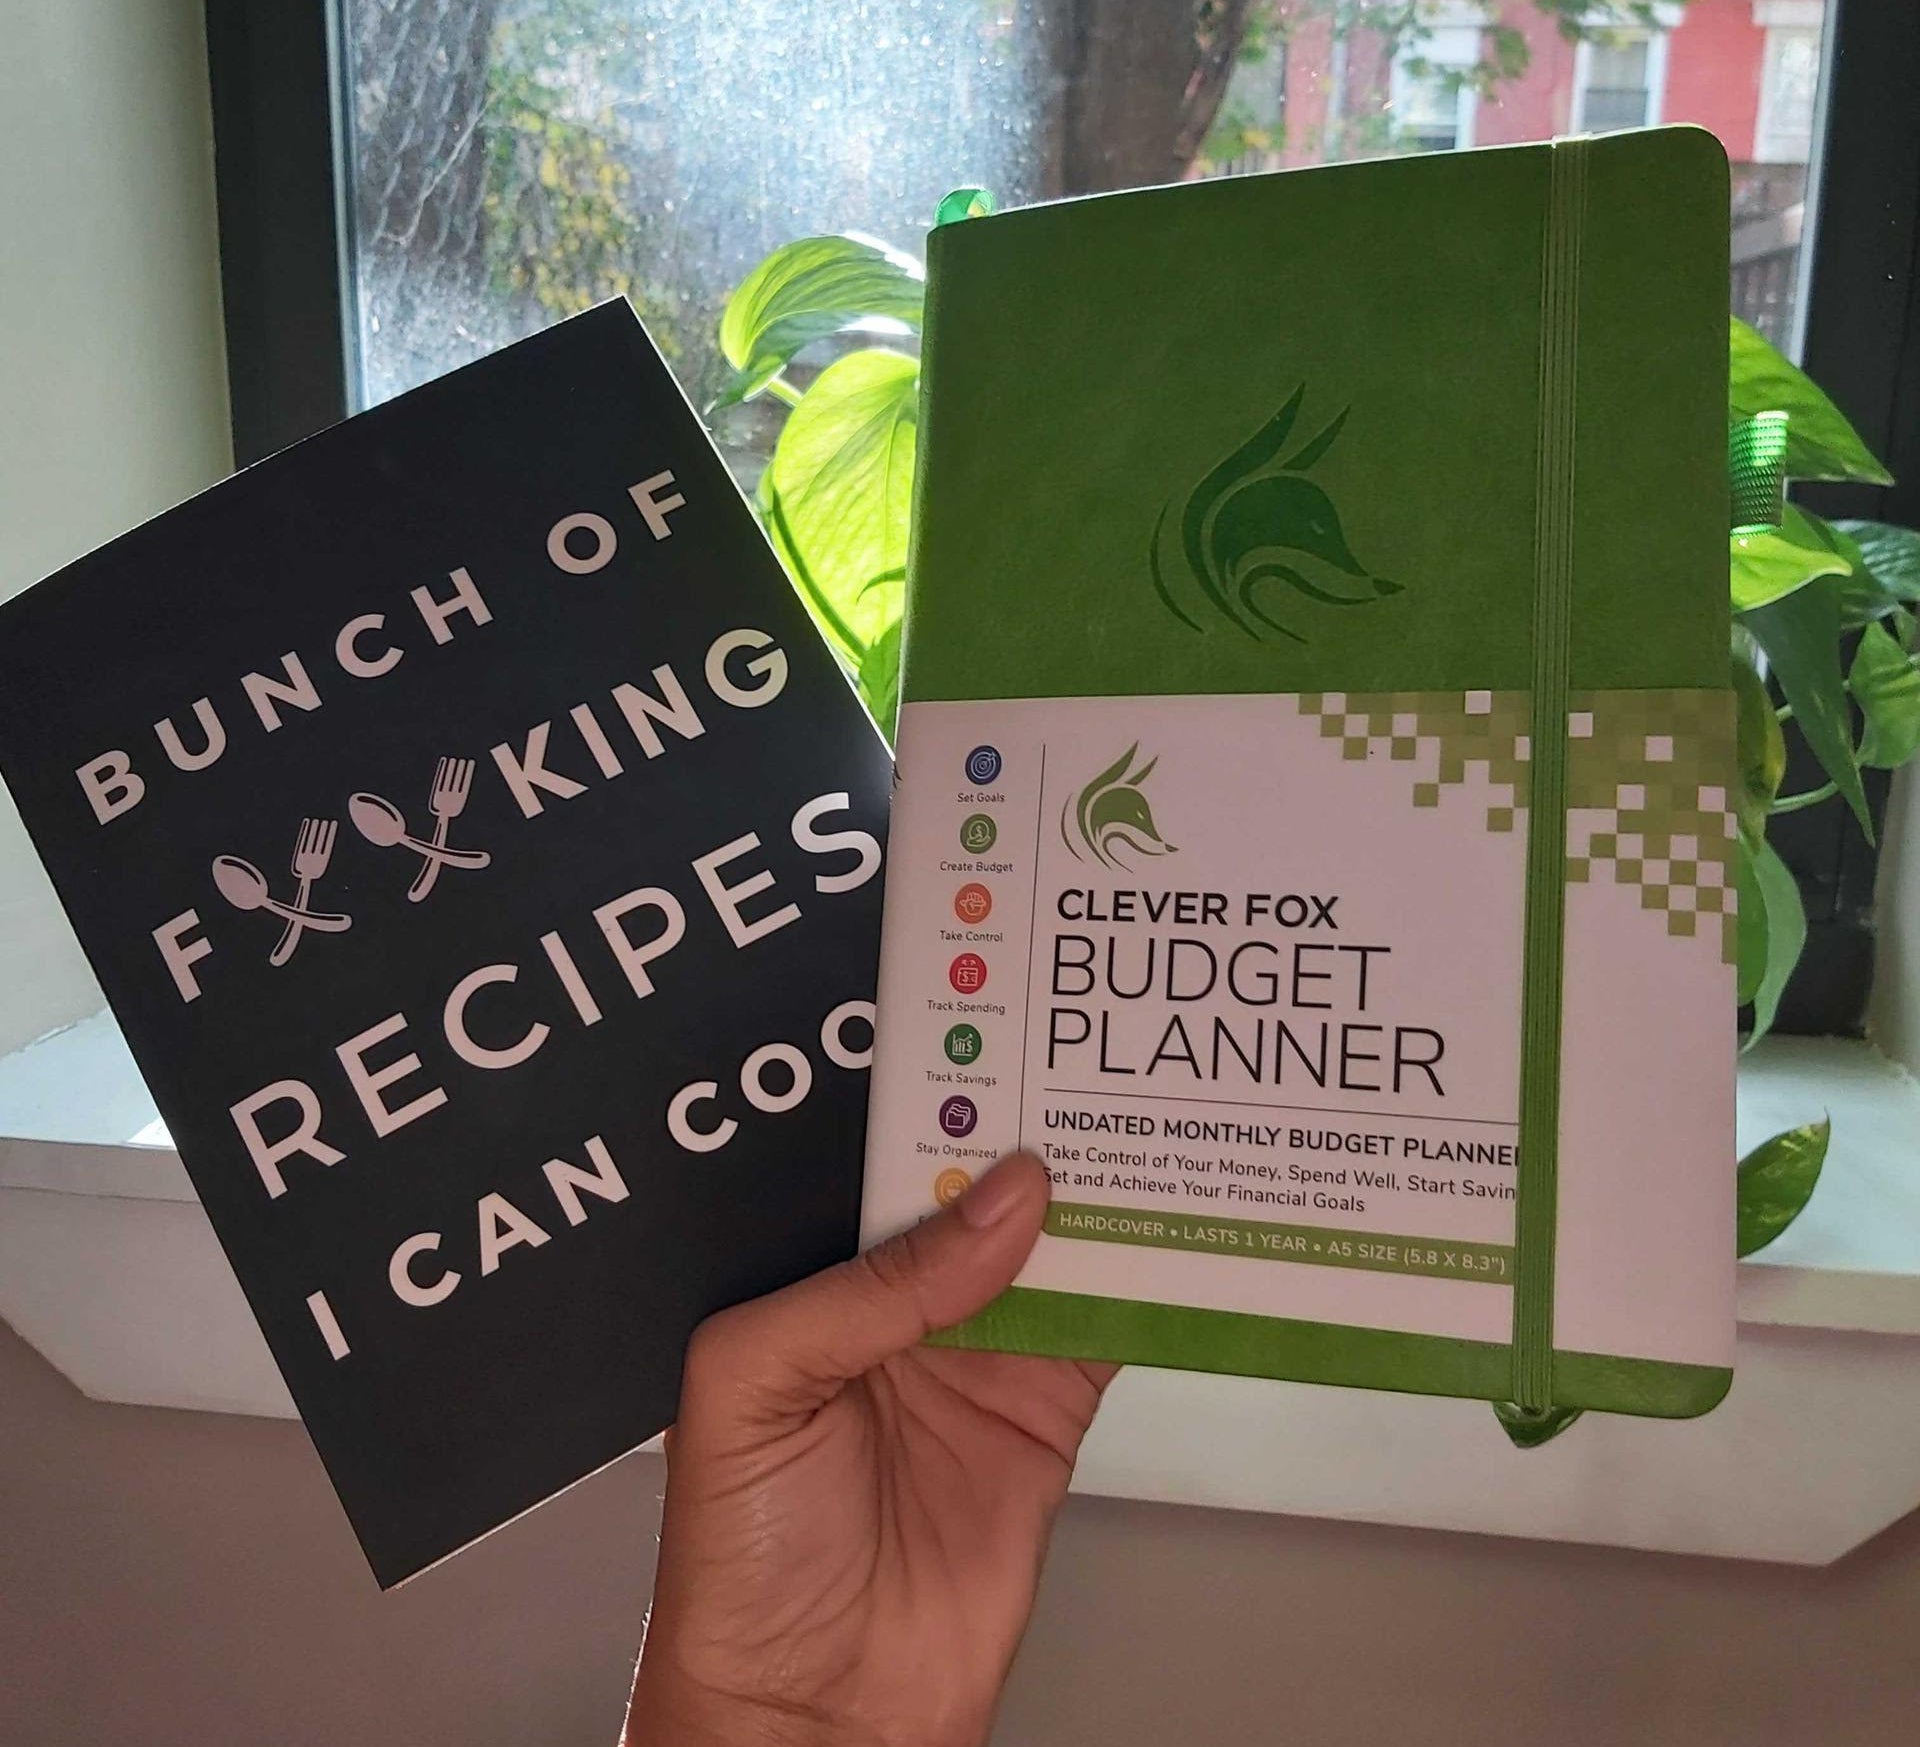 buzzfeeder holding the budget planner and a recipe book that reads &quot;bunch of forking recipes I can cook&quot; with forks in the middle of the word &quot;forking&quot;